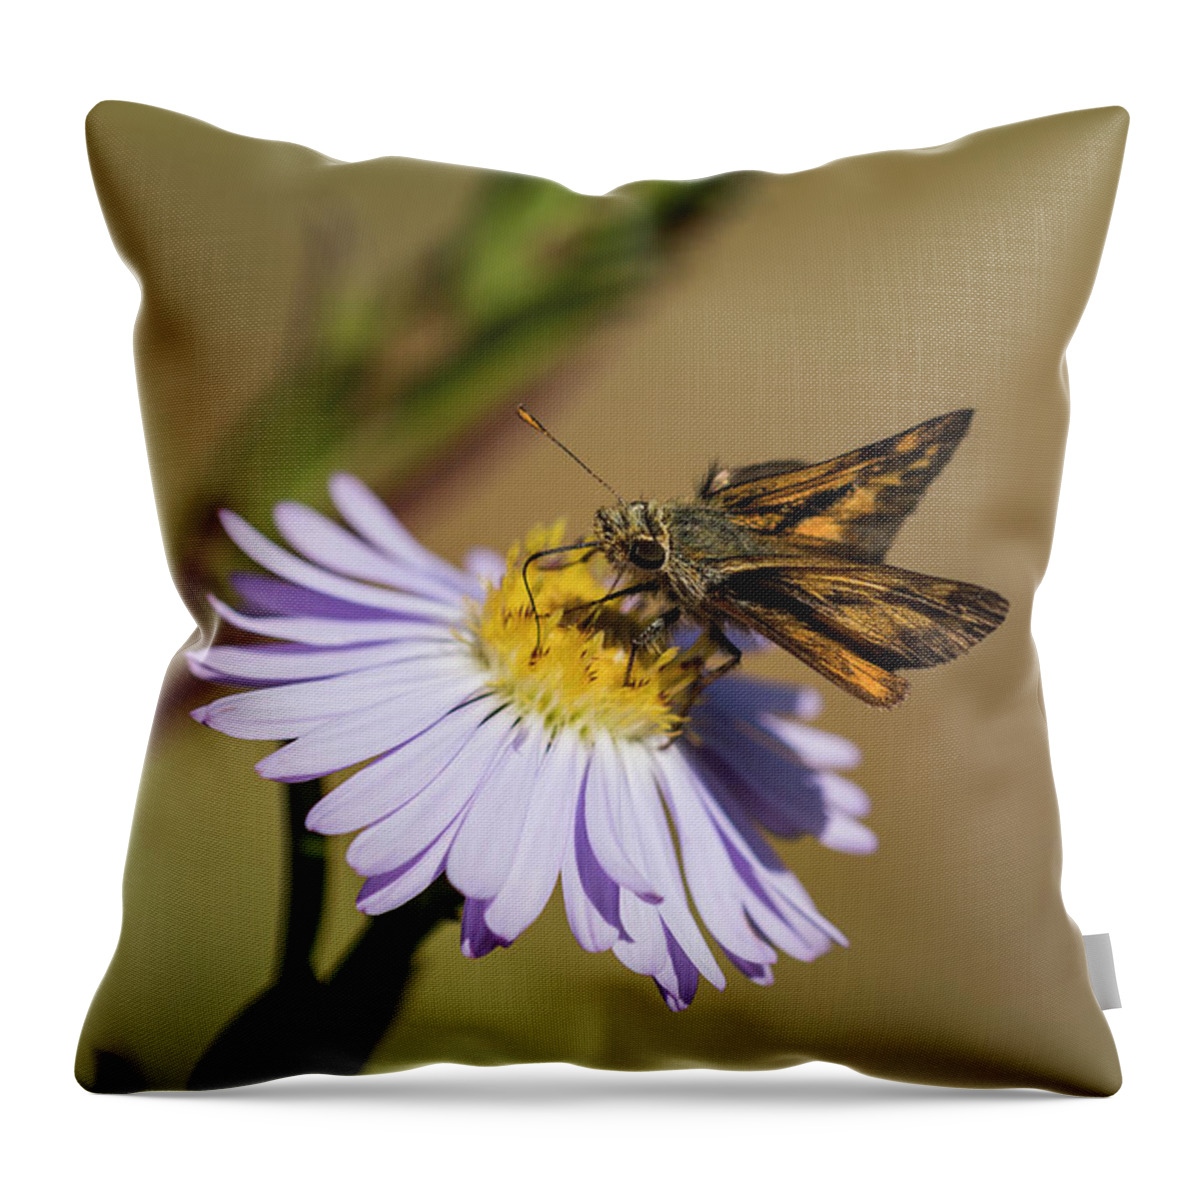 Animals Throw Pillow featuring the photograph Hungry Skipper by Robert Potts